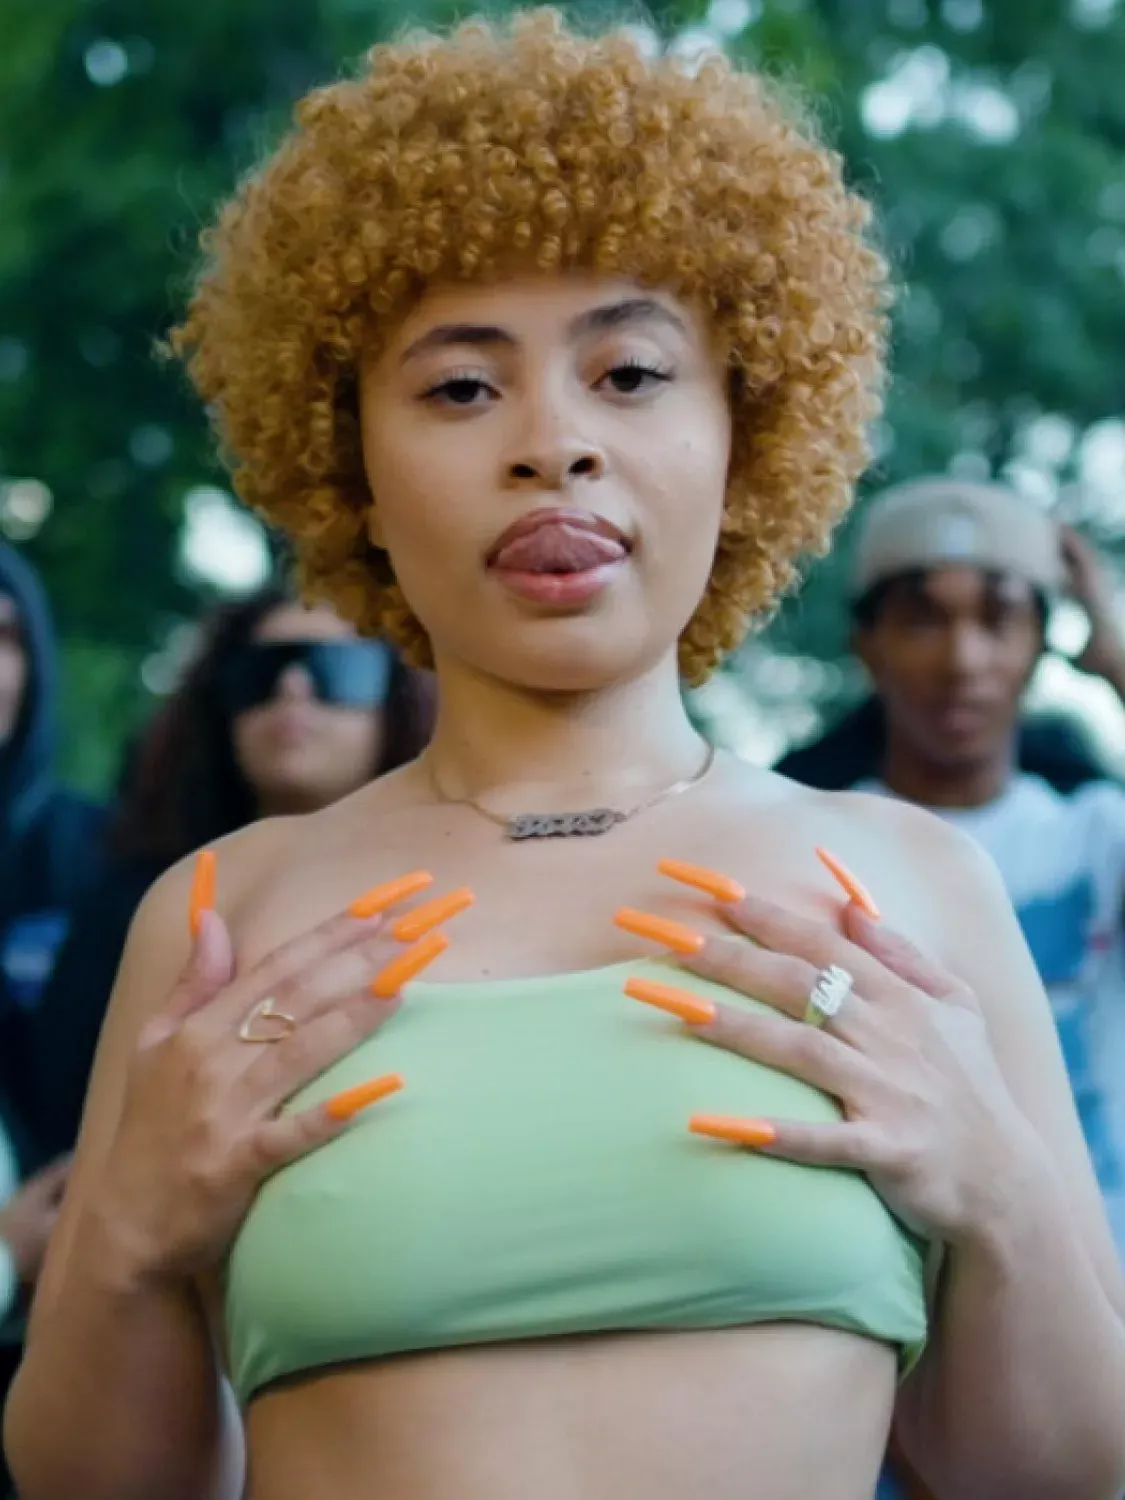 A woman with orange nails and an orange afro. - Ice Spice